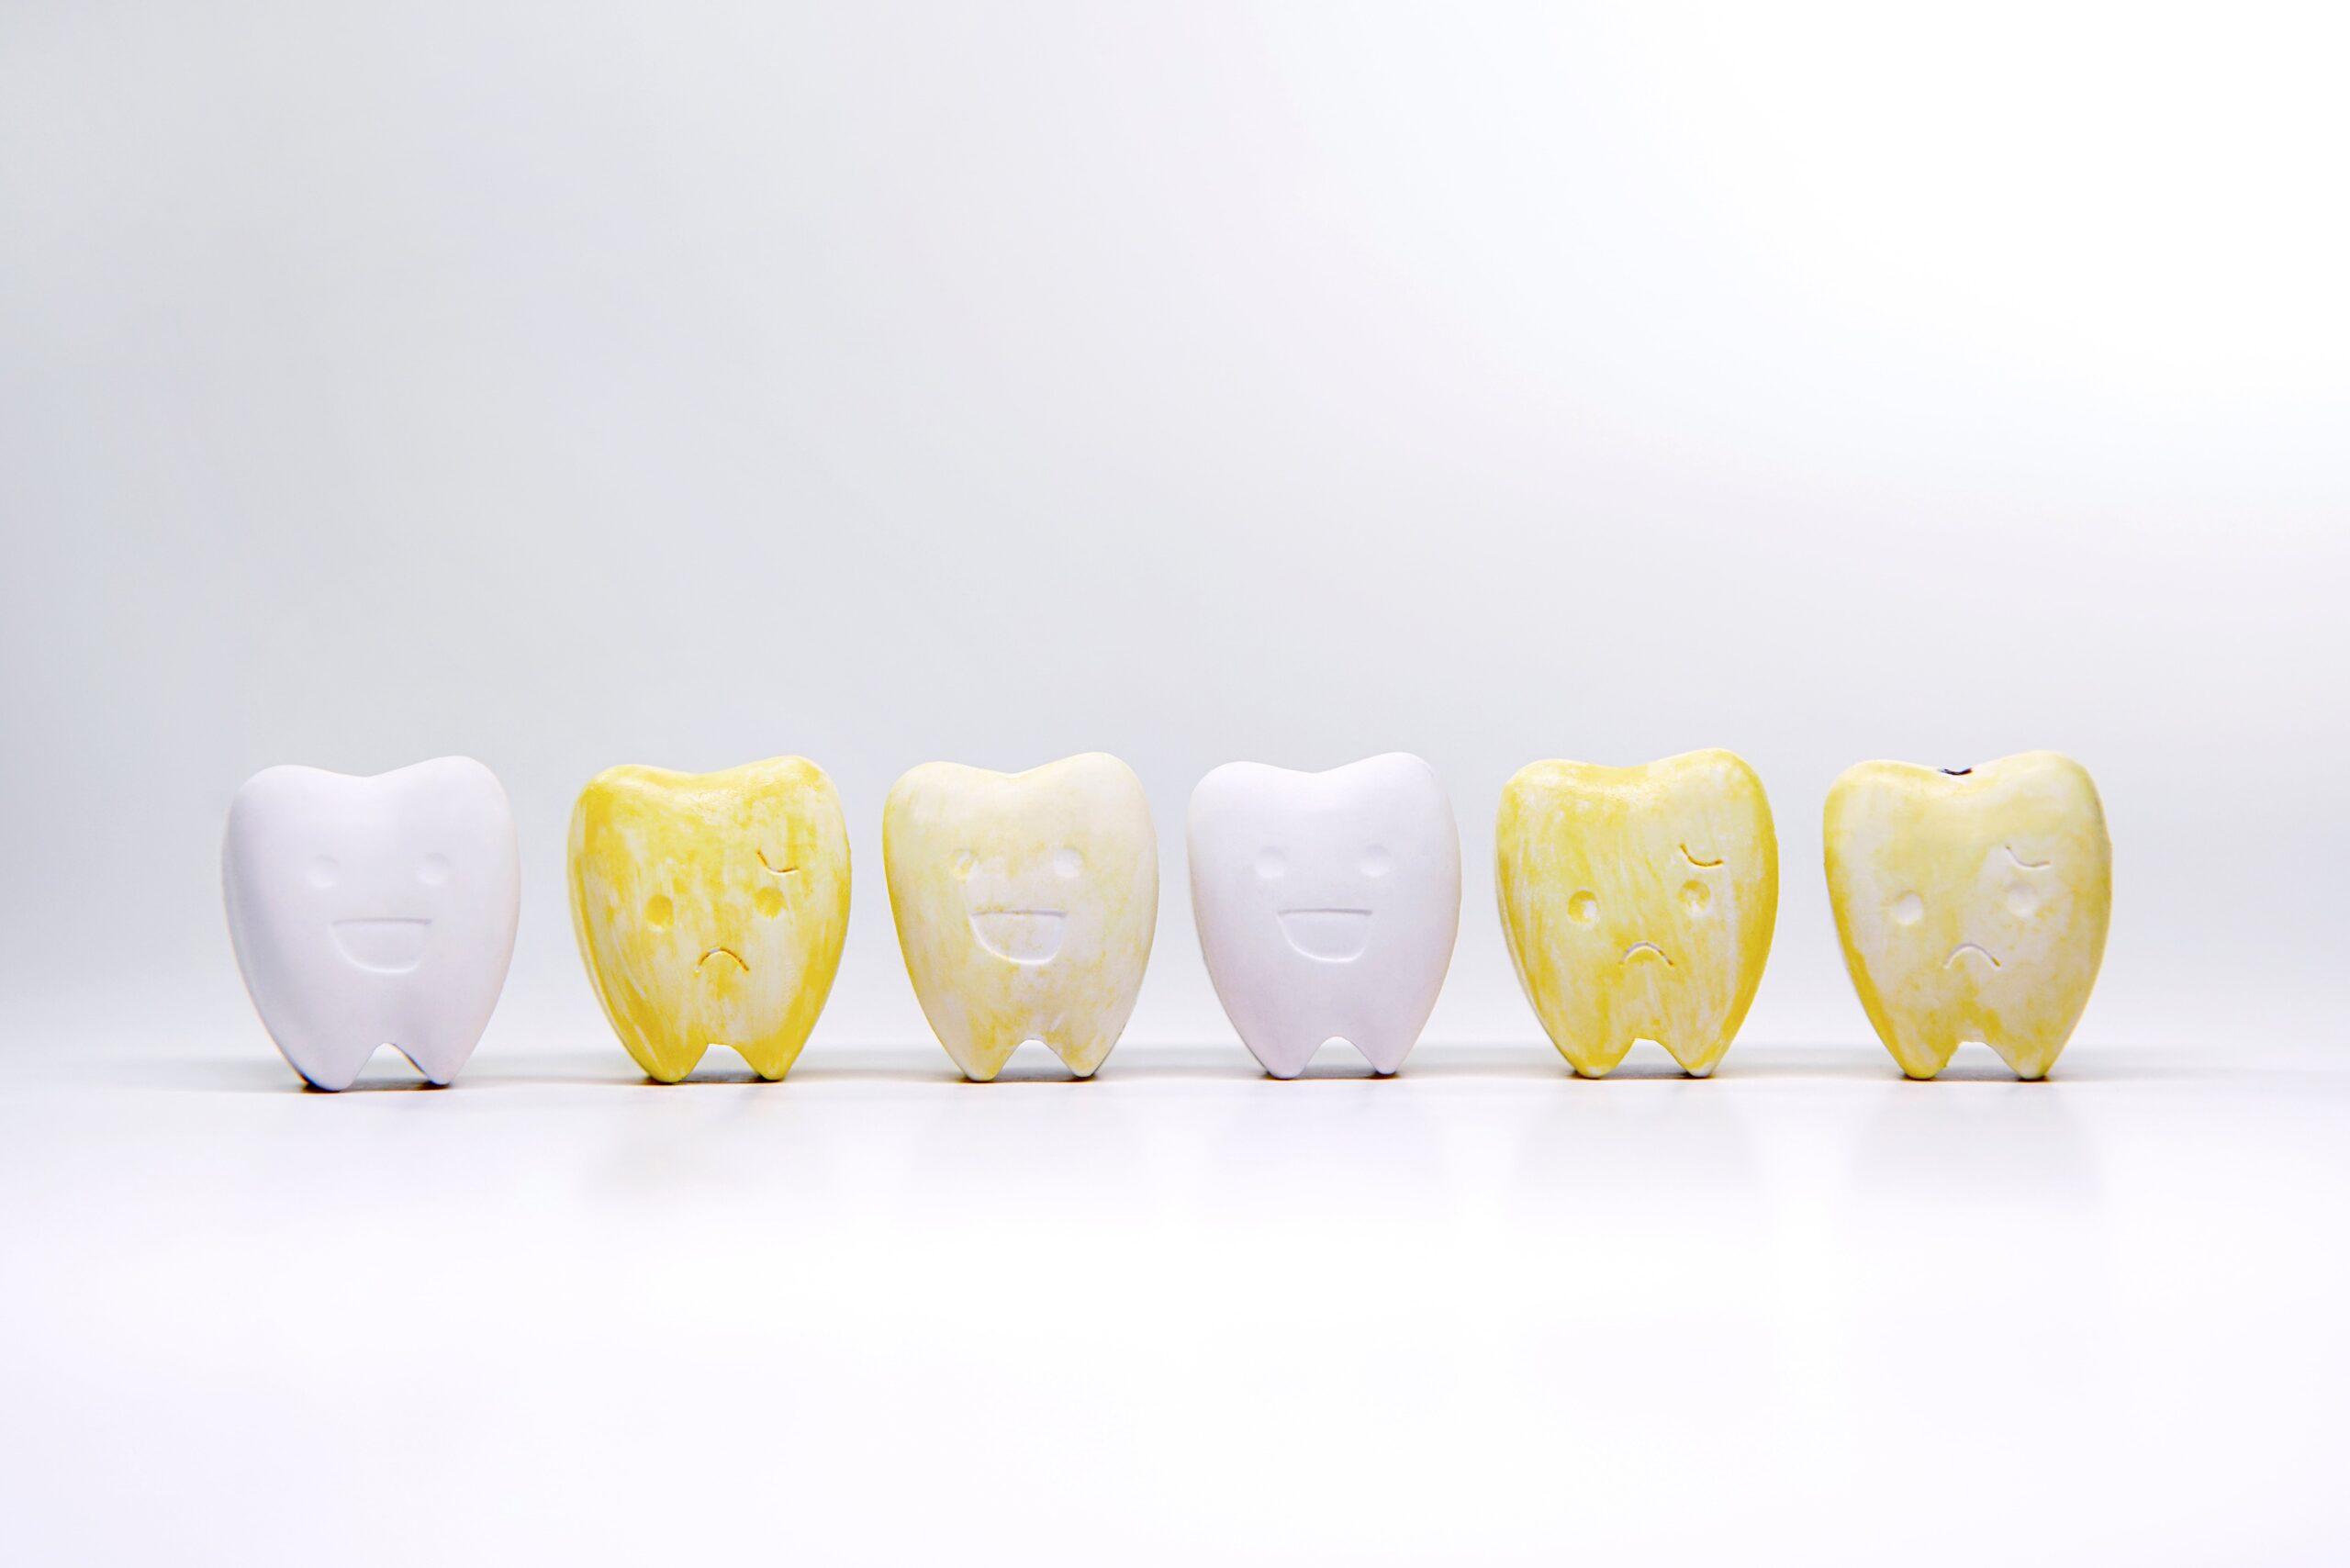 Yellow teeth and whitening teeth model, Yellow teeth that cause a loss of confidence to smile